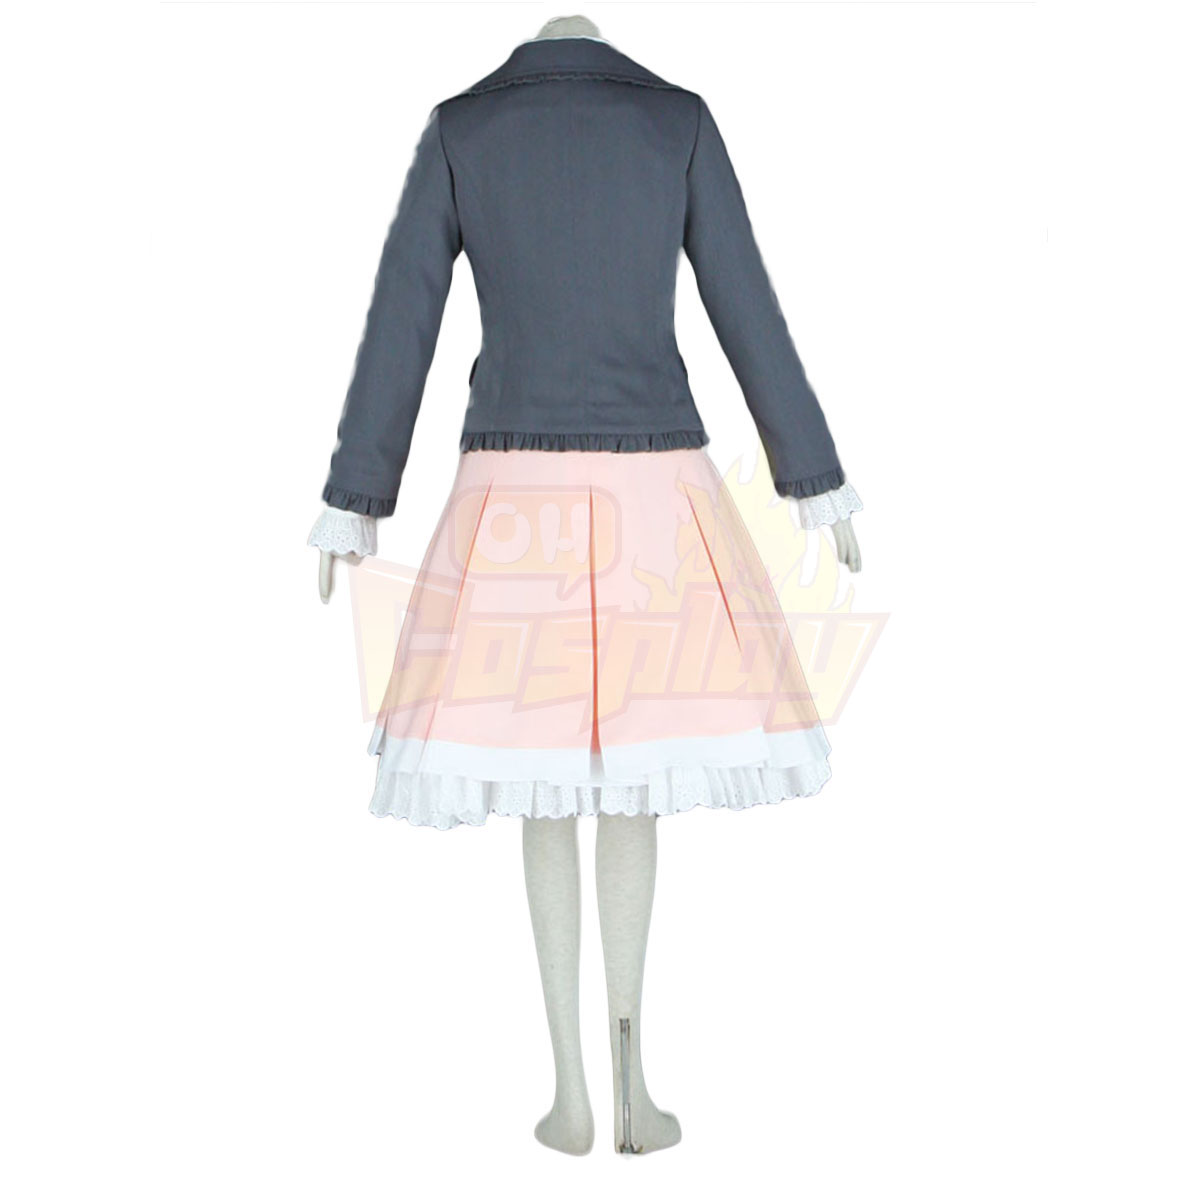 Deluxe Lolita Culture Coat Skirt Bustle Middle Dresses Cosplay Costumes